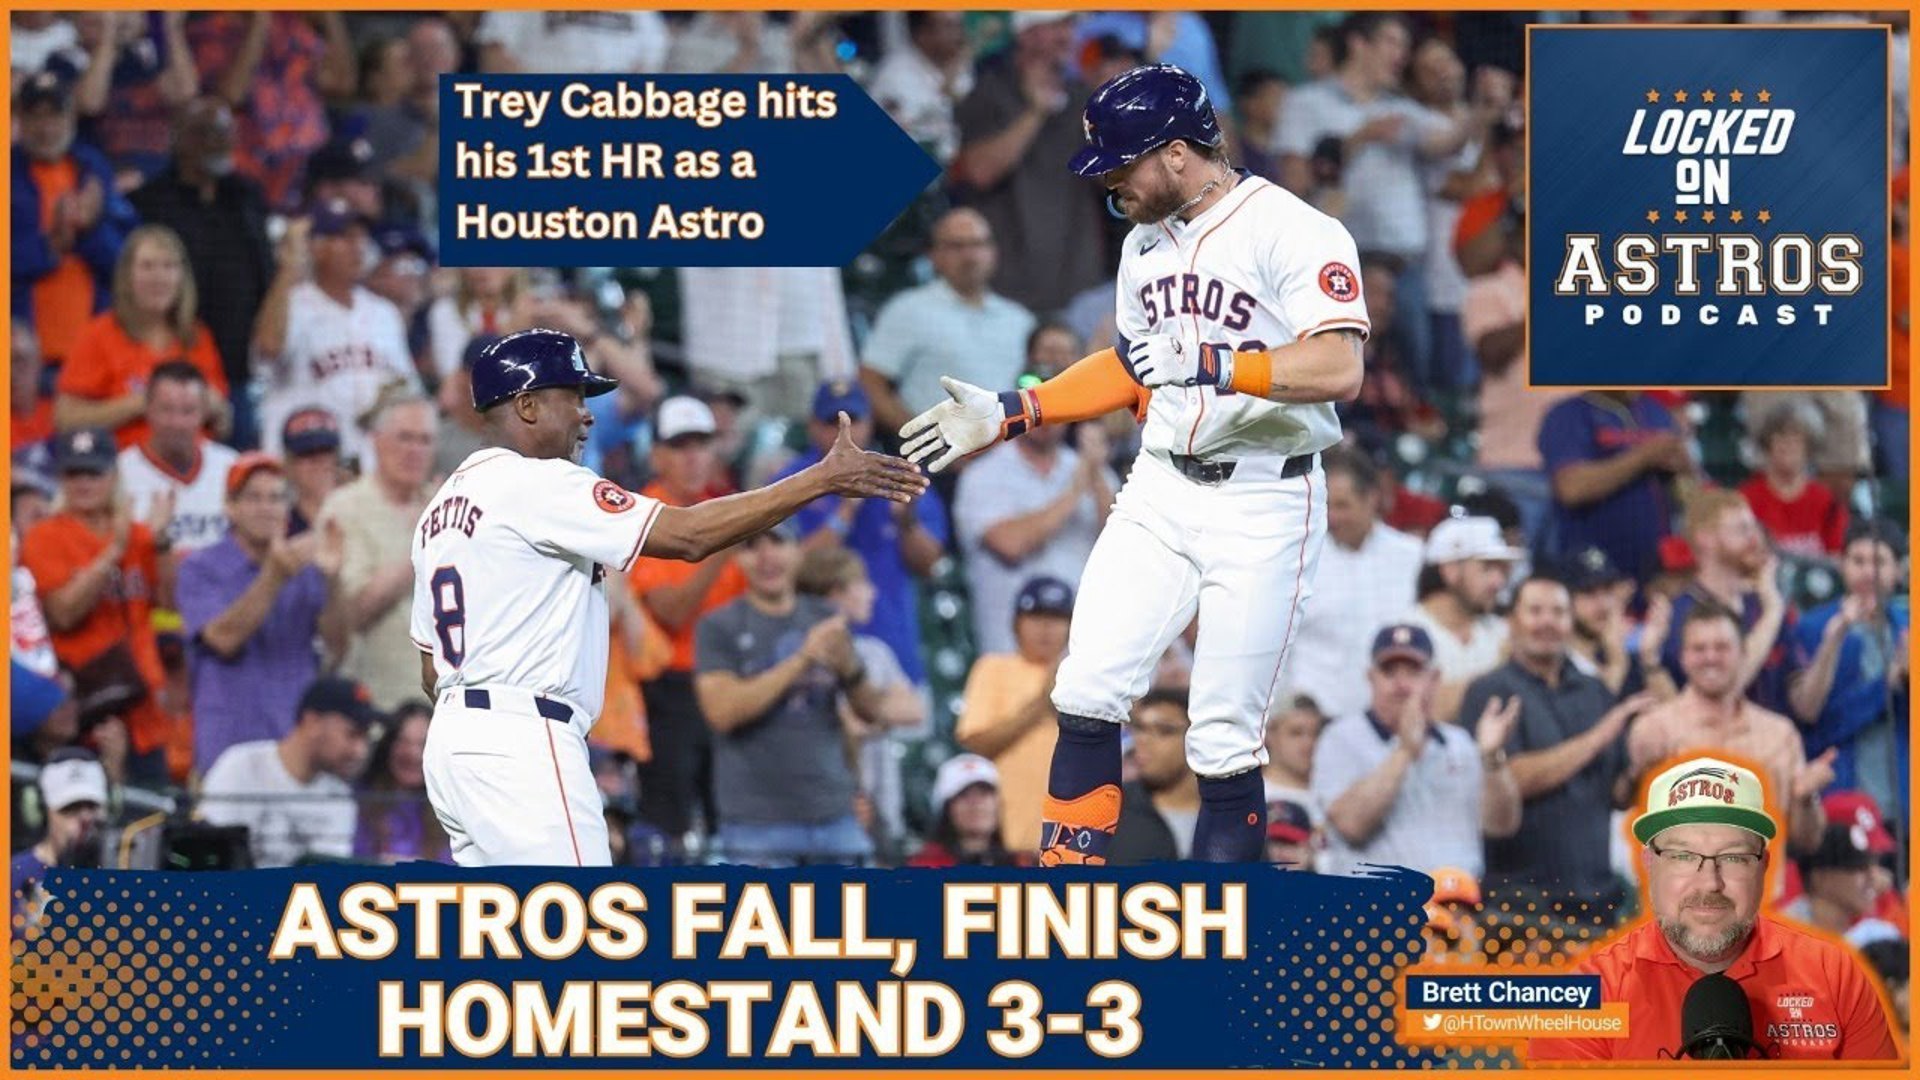 Astros fall in final game, finish homestand 3-3